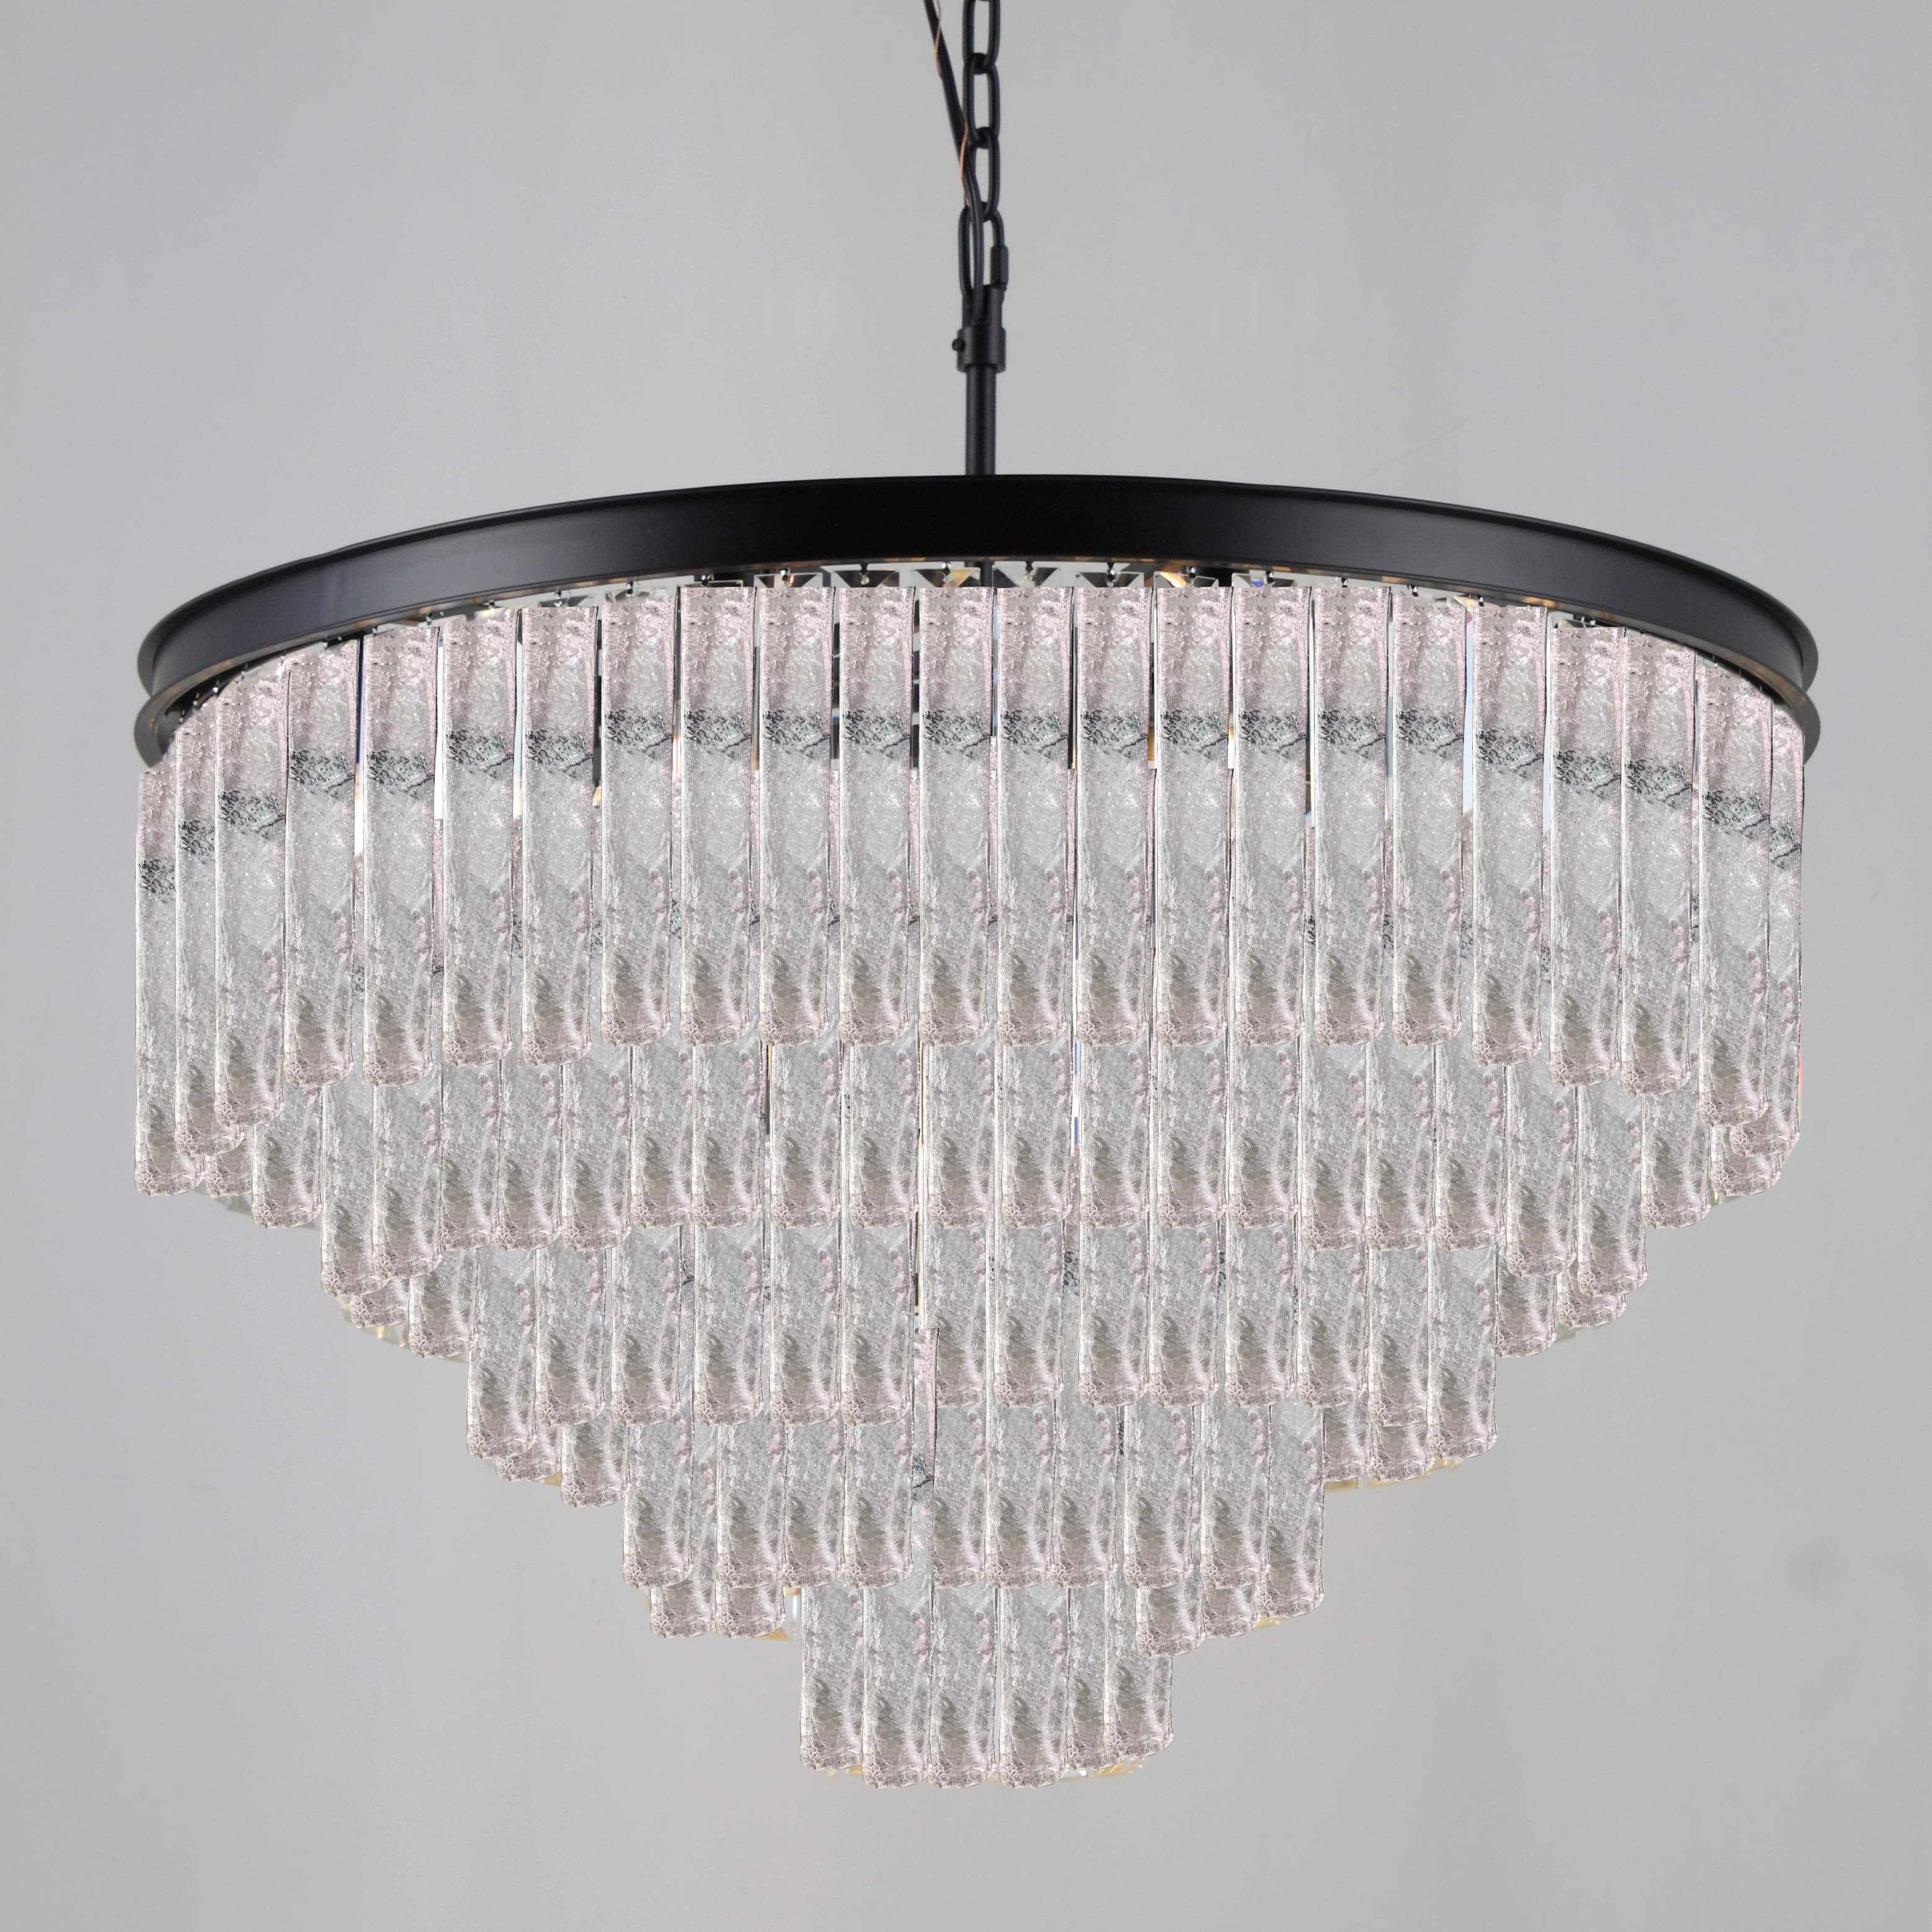 Seline Cracked Textured Glass Round Chandelier Collection - Italian Concept